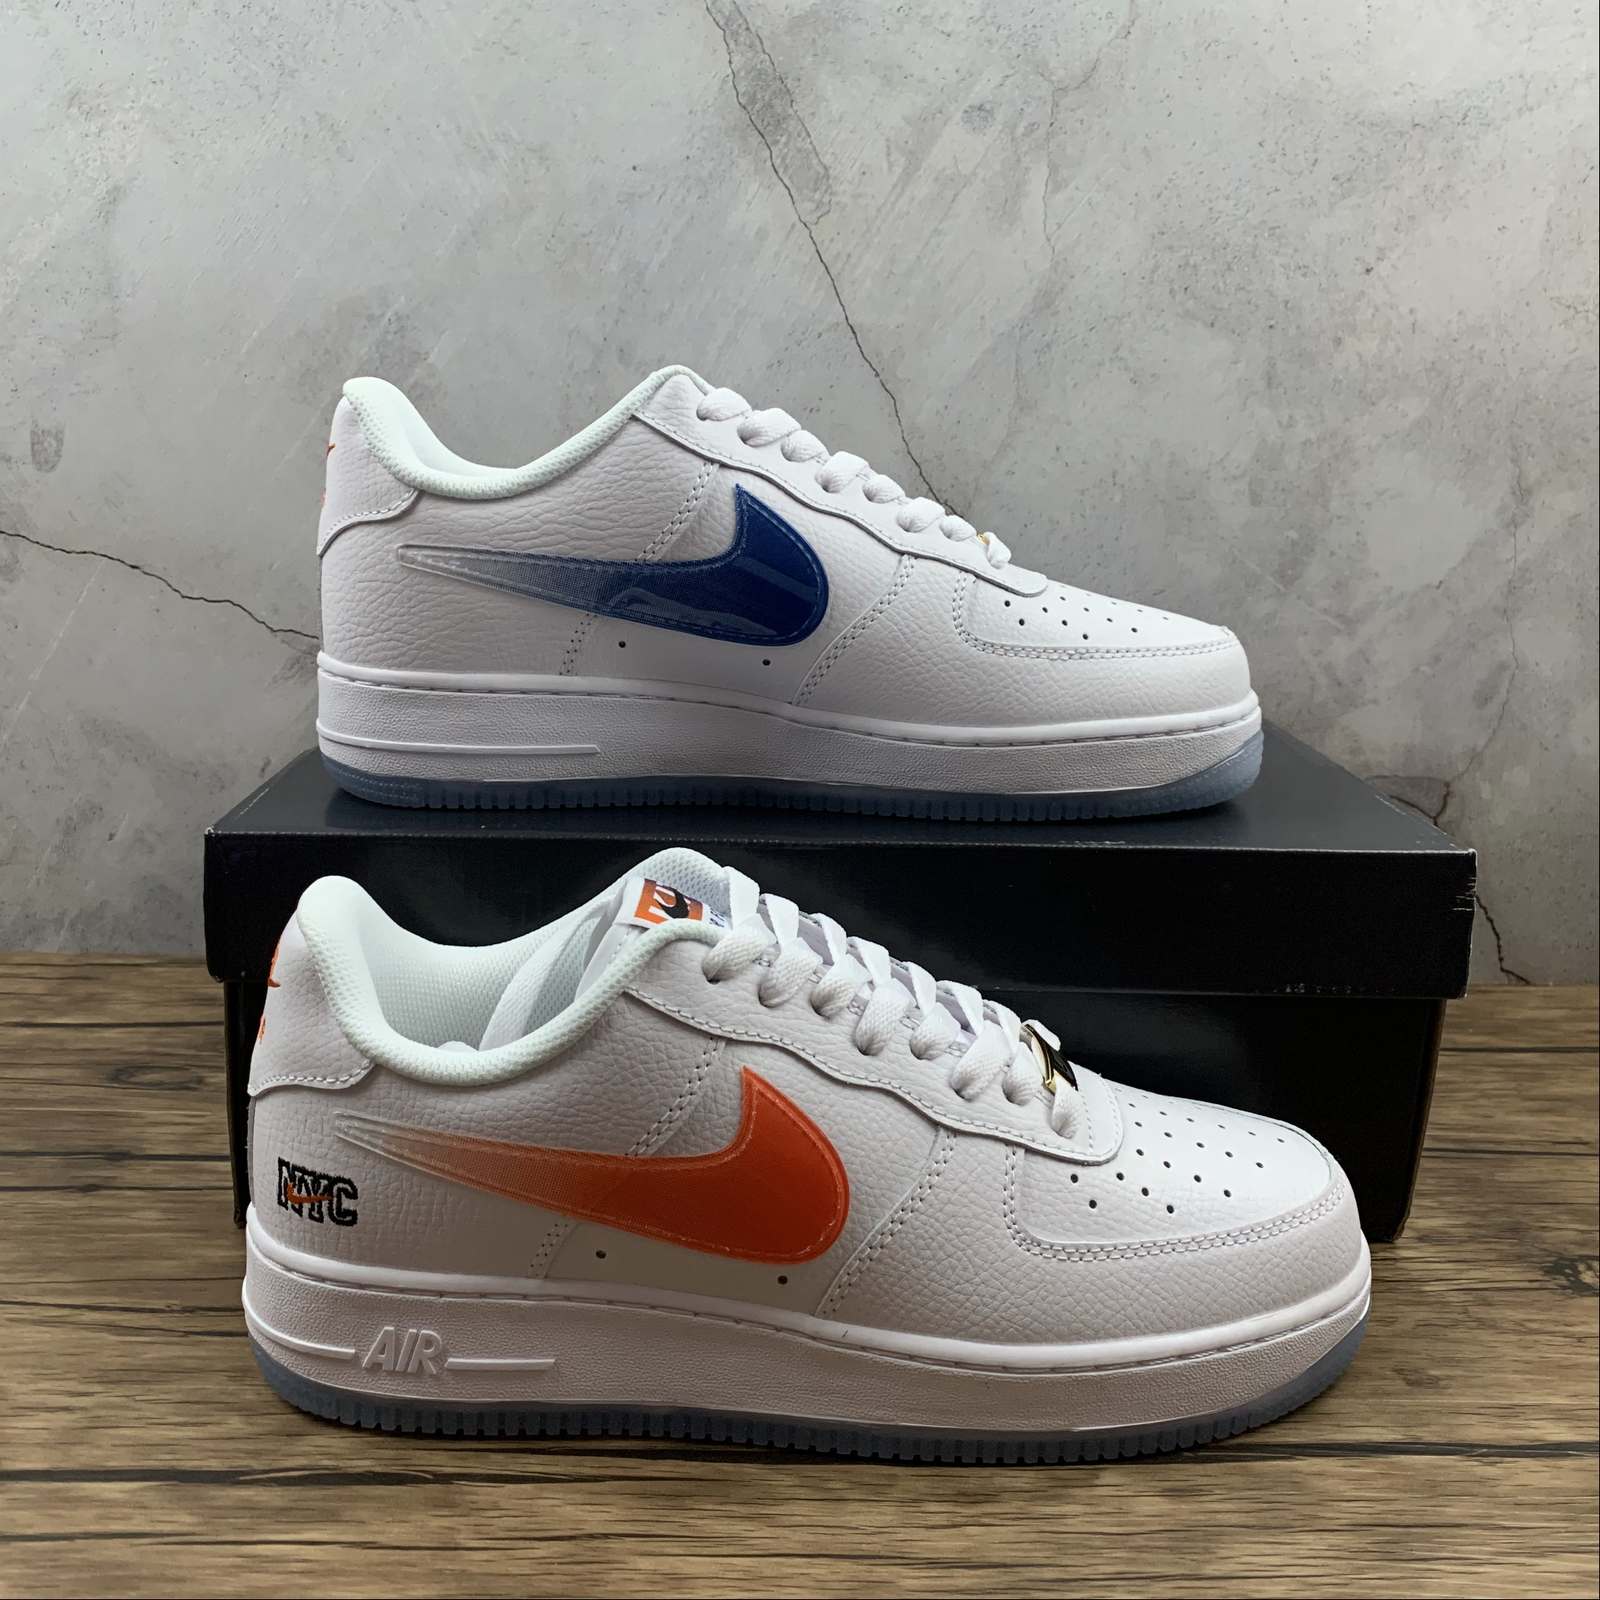 nike air force 1 low nyc hs